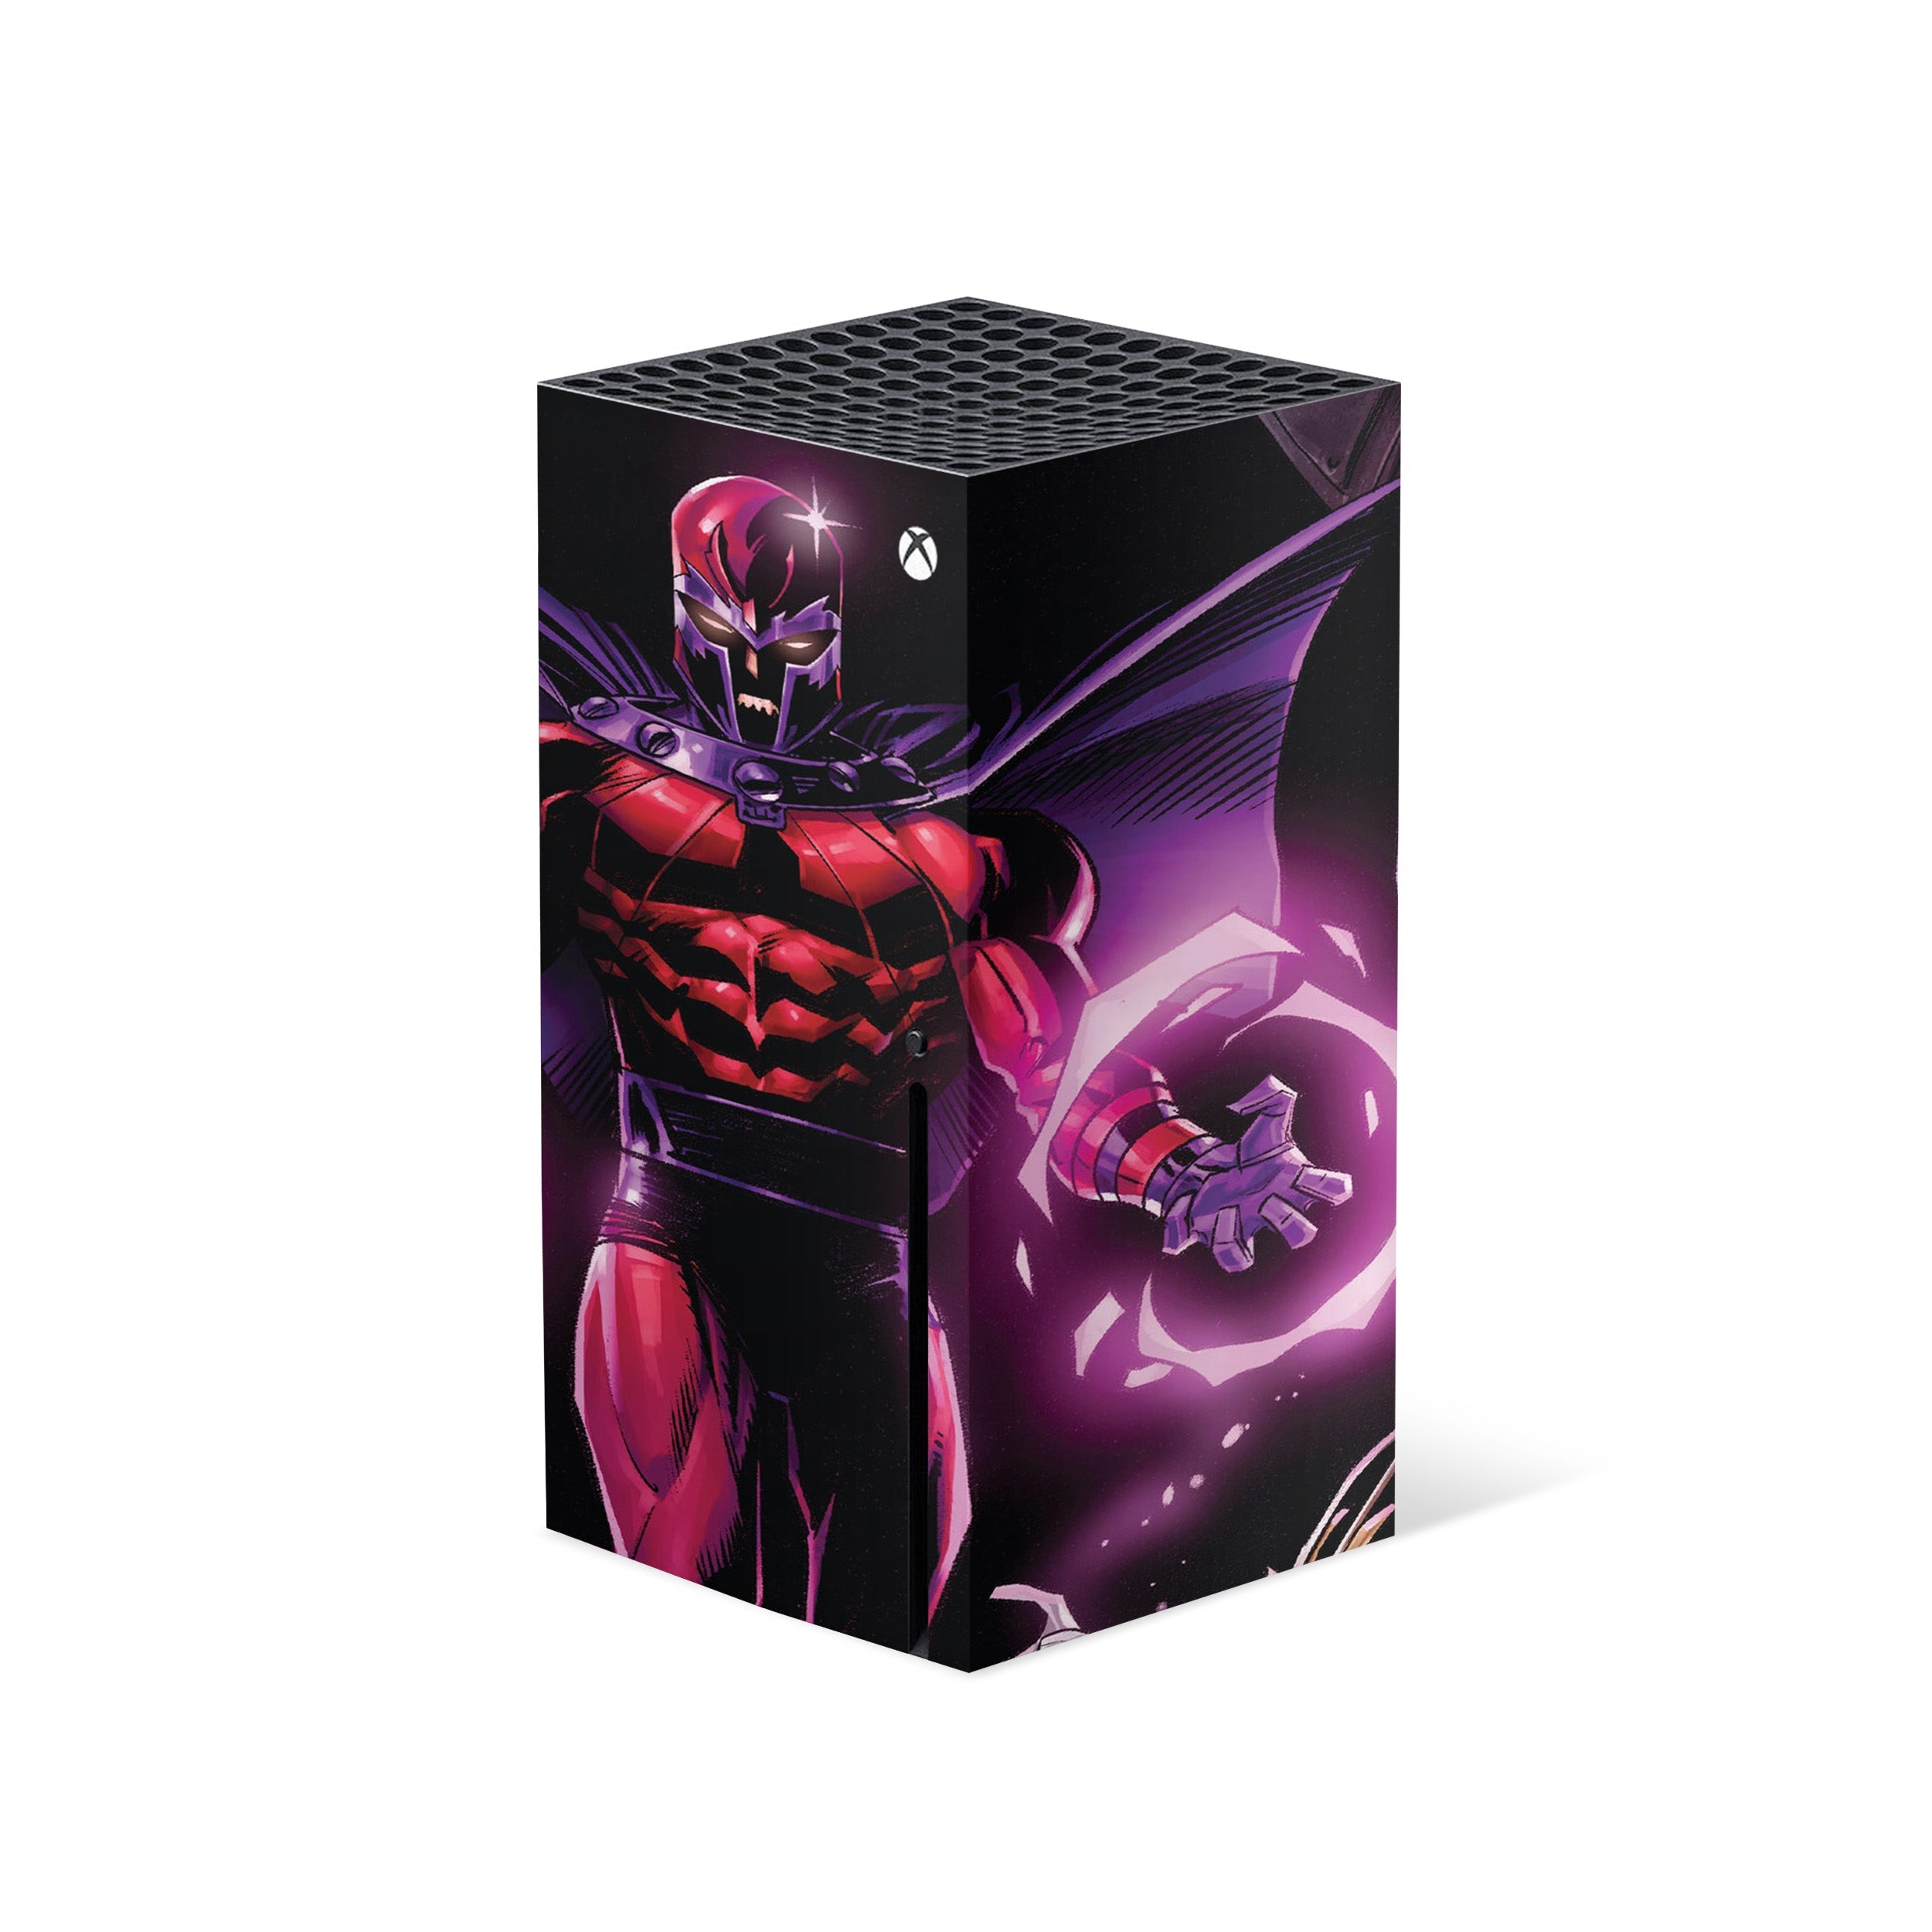 A video game skin featuring a Marvel Comics X Men Magneto design for the Xbox Series X.